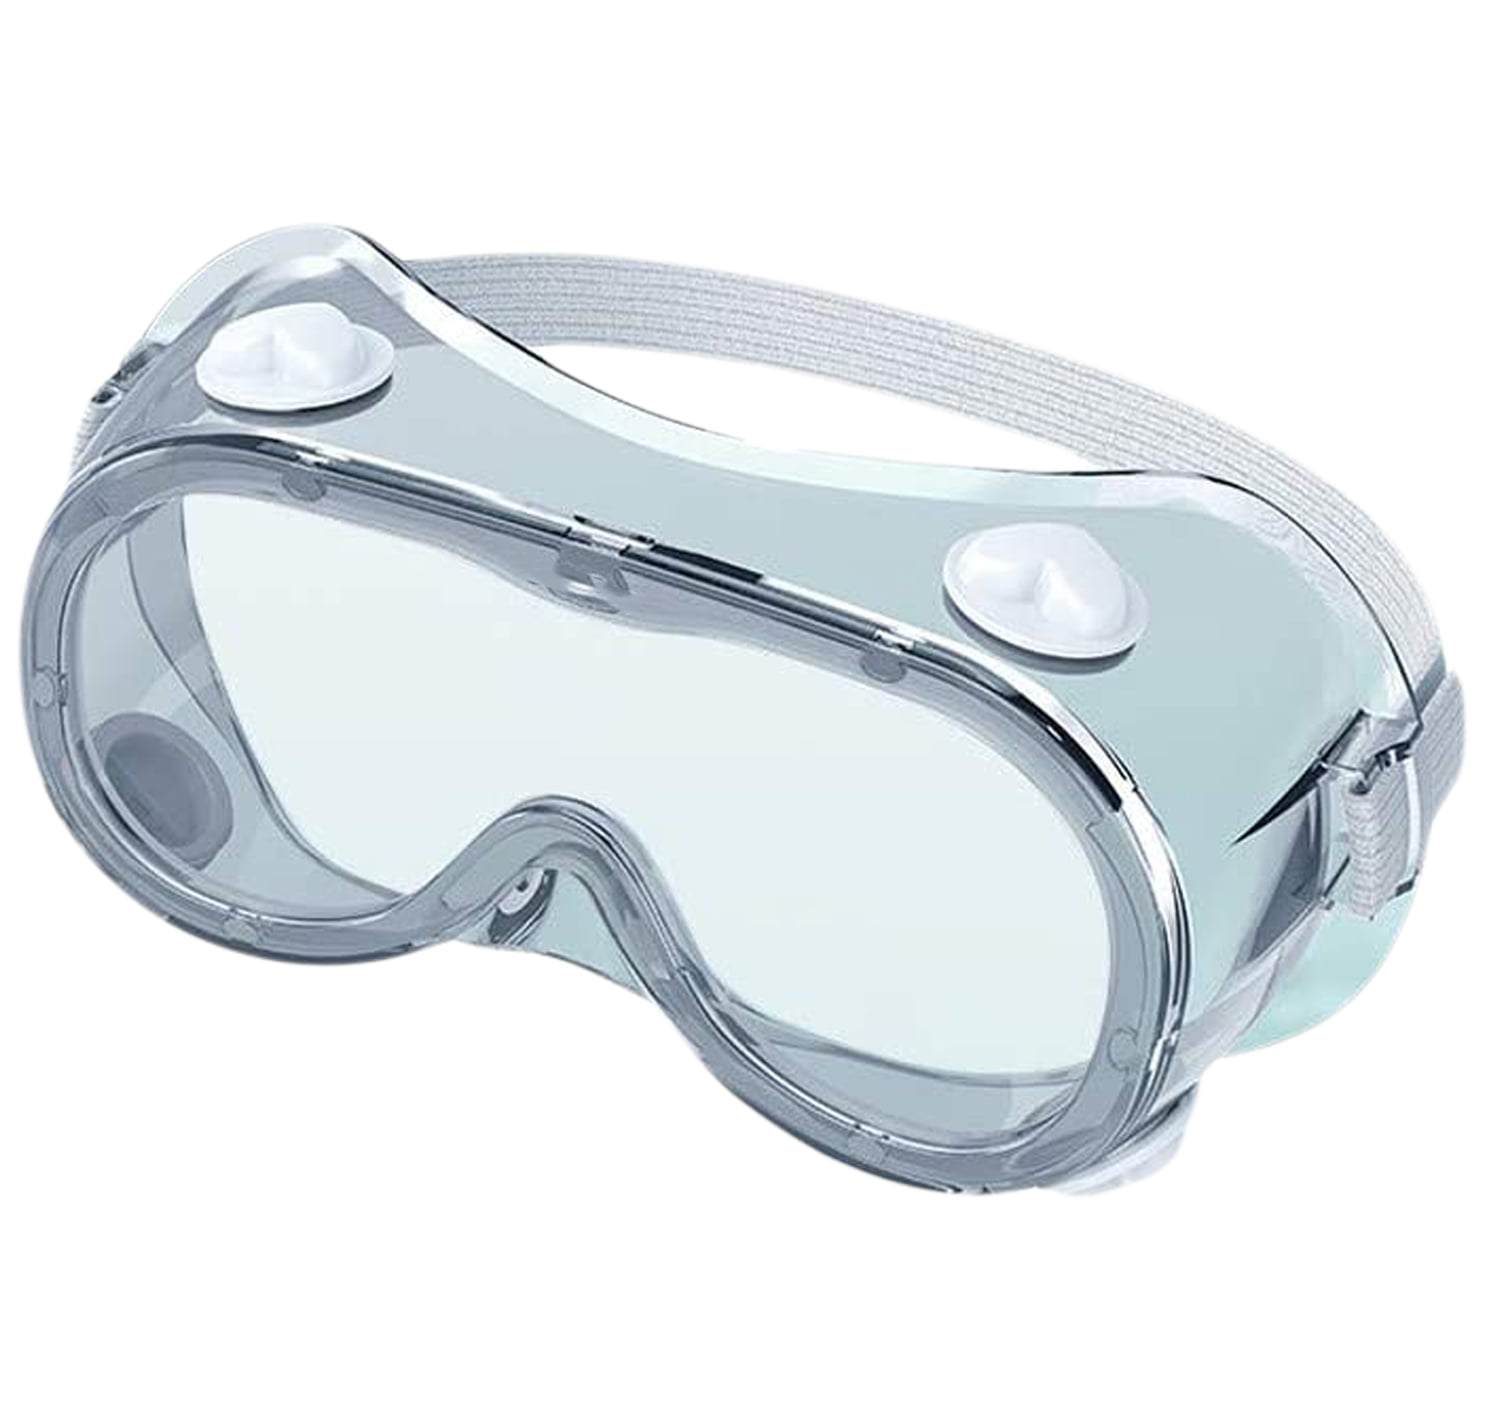 Eye Protection Goggles Anti-impact Clear Lens Protective Lab Safety Glasses 